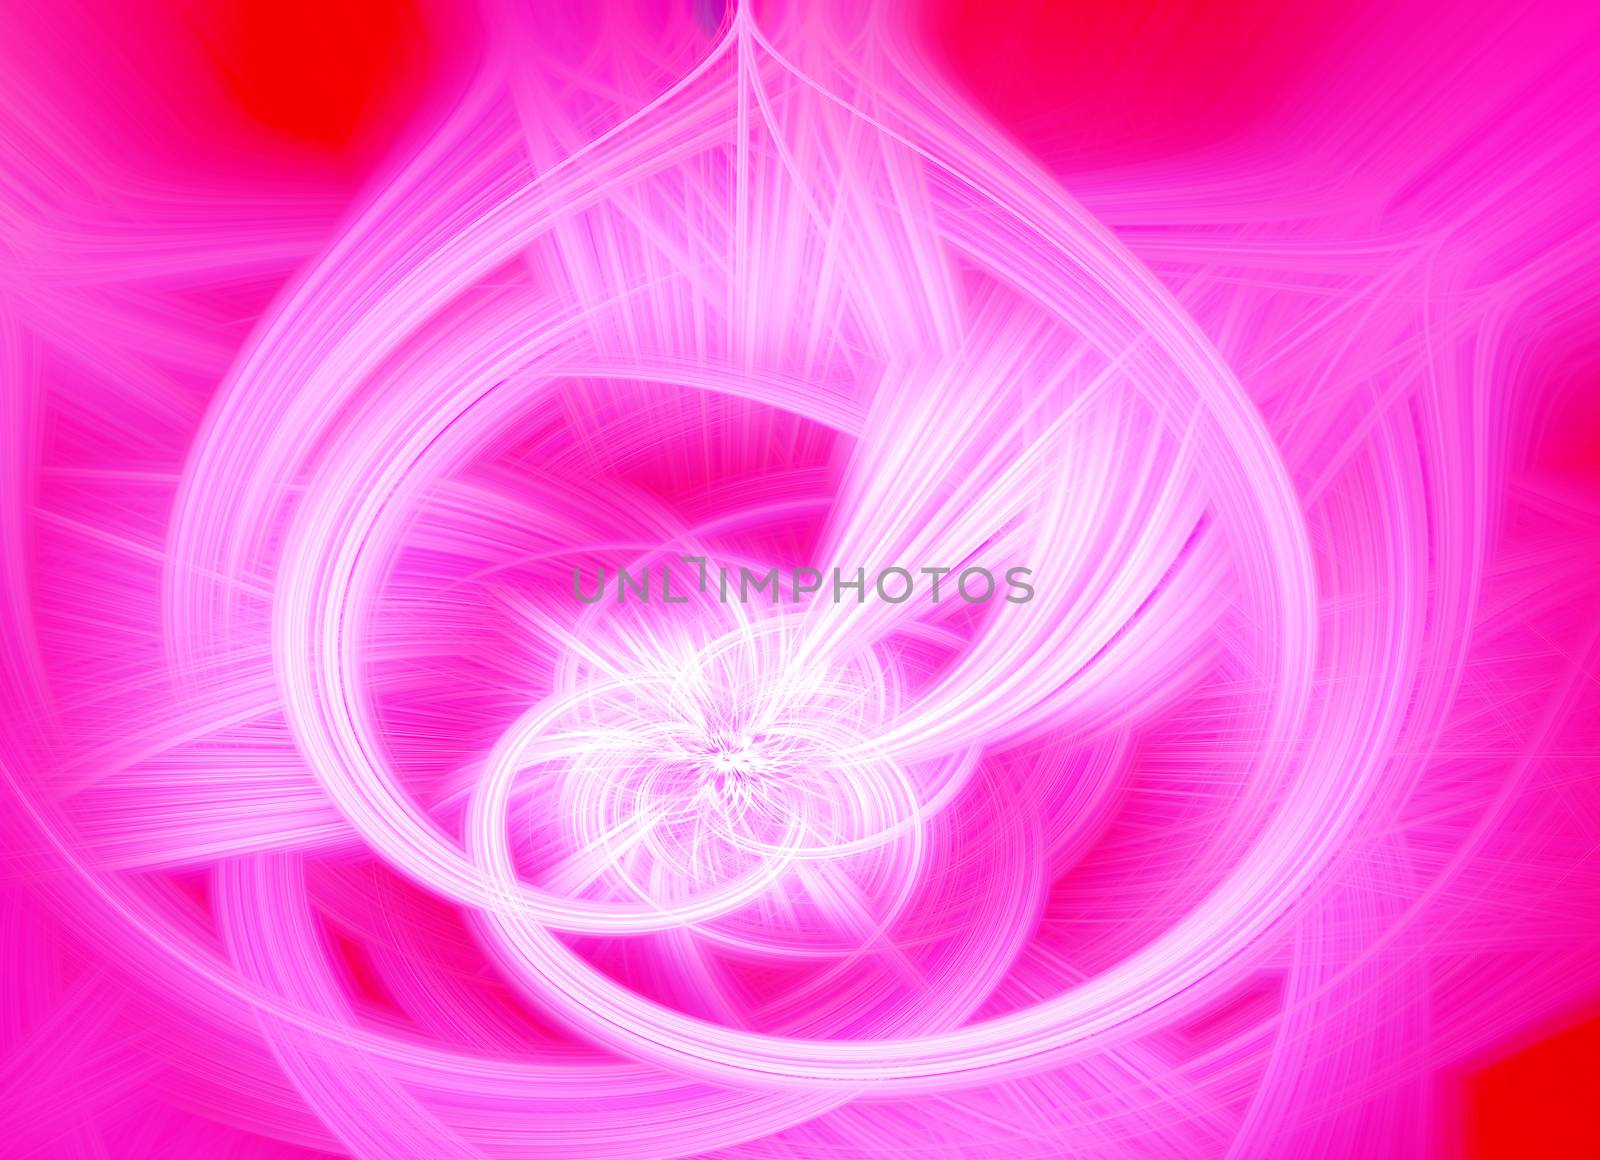 Beautiful abstract intertwined glowing 3d fibers forming a shape of sparkle, flame, flower, interlinked hearts. Bright red and pink colors. Illustration by DamantisZ